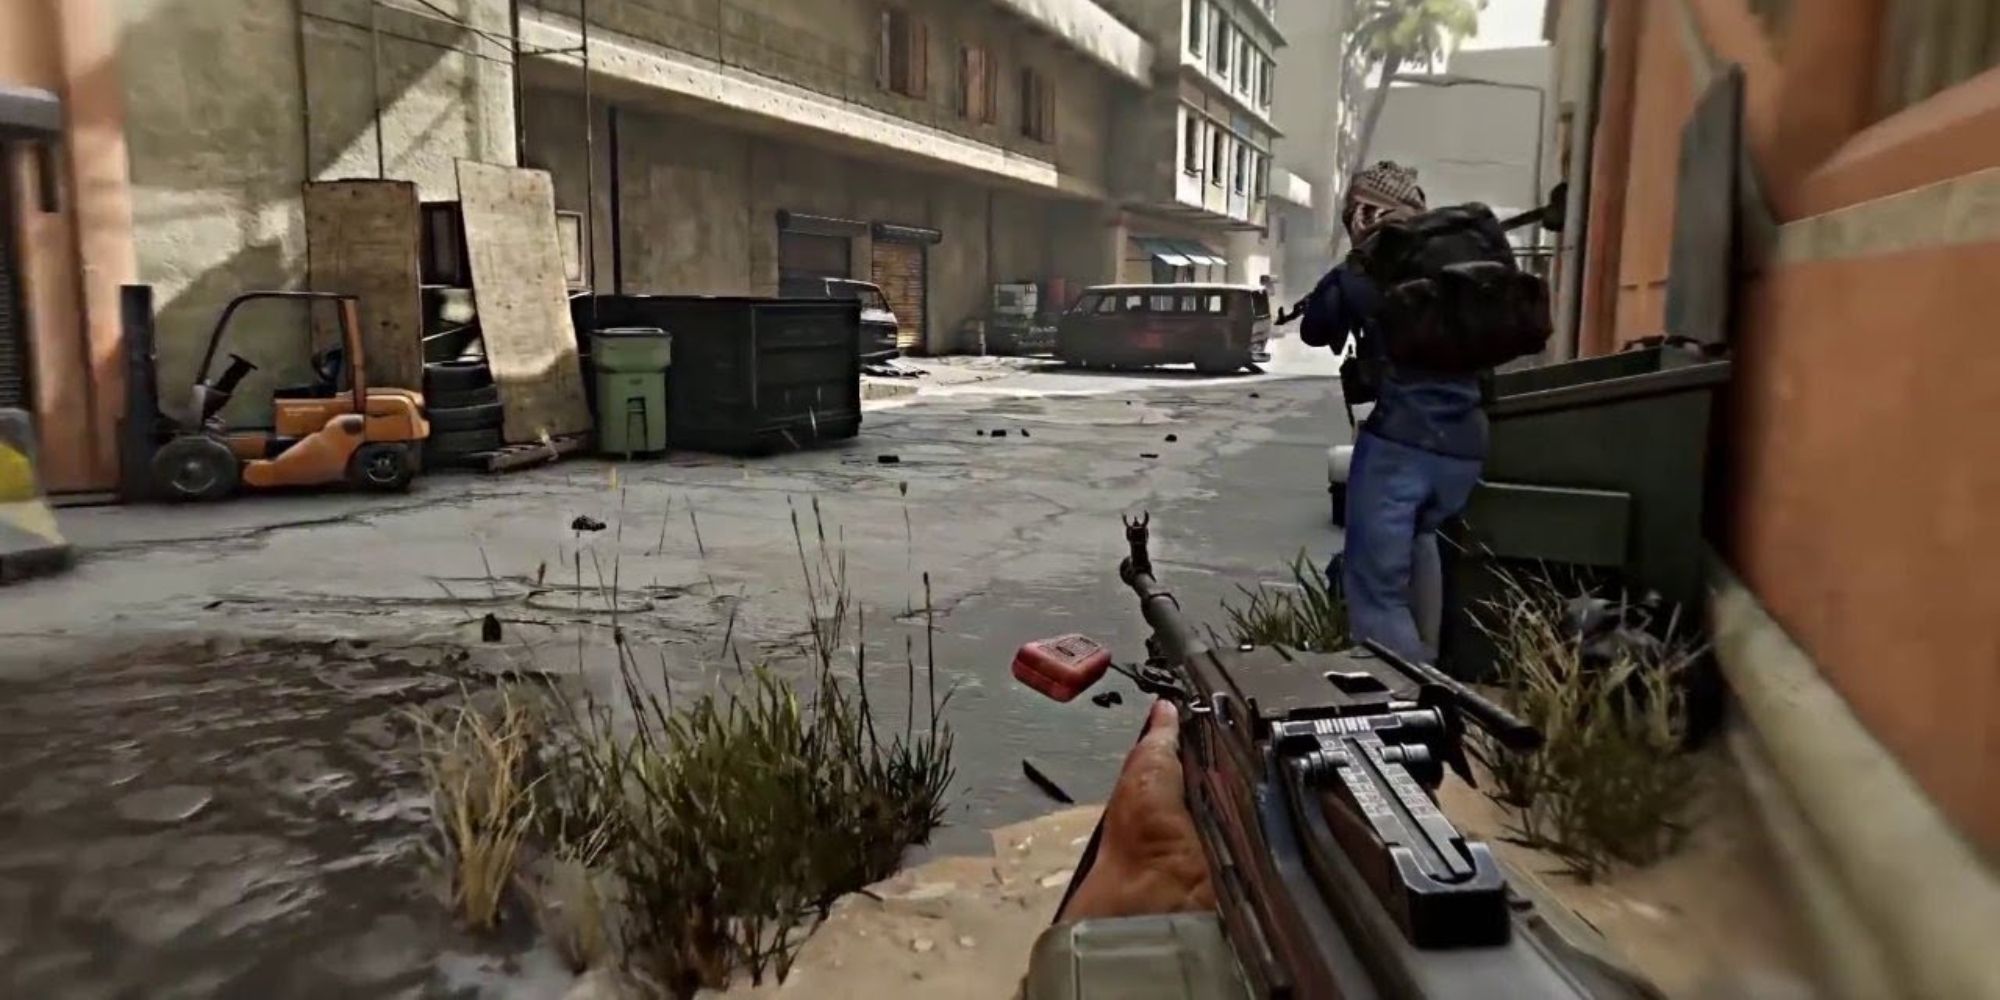 Insurgency Sandstorm Maps a first-person perspective view of an LMG with a soldier running away in the distance against a wall of grey buildings in the background